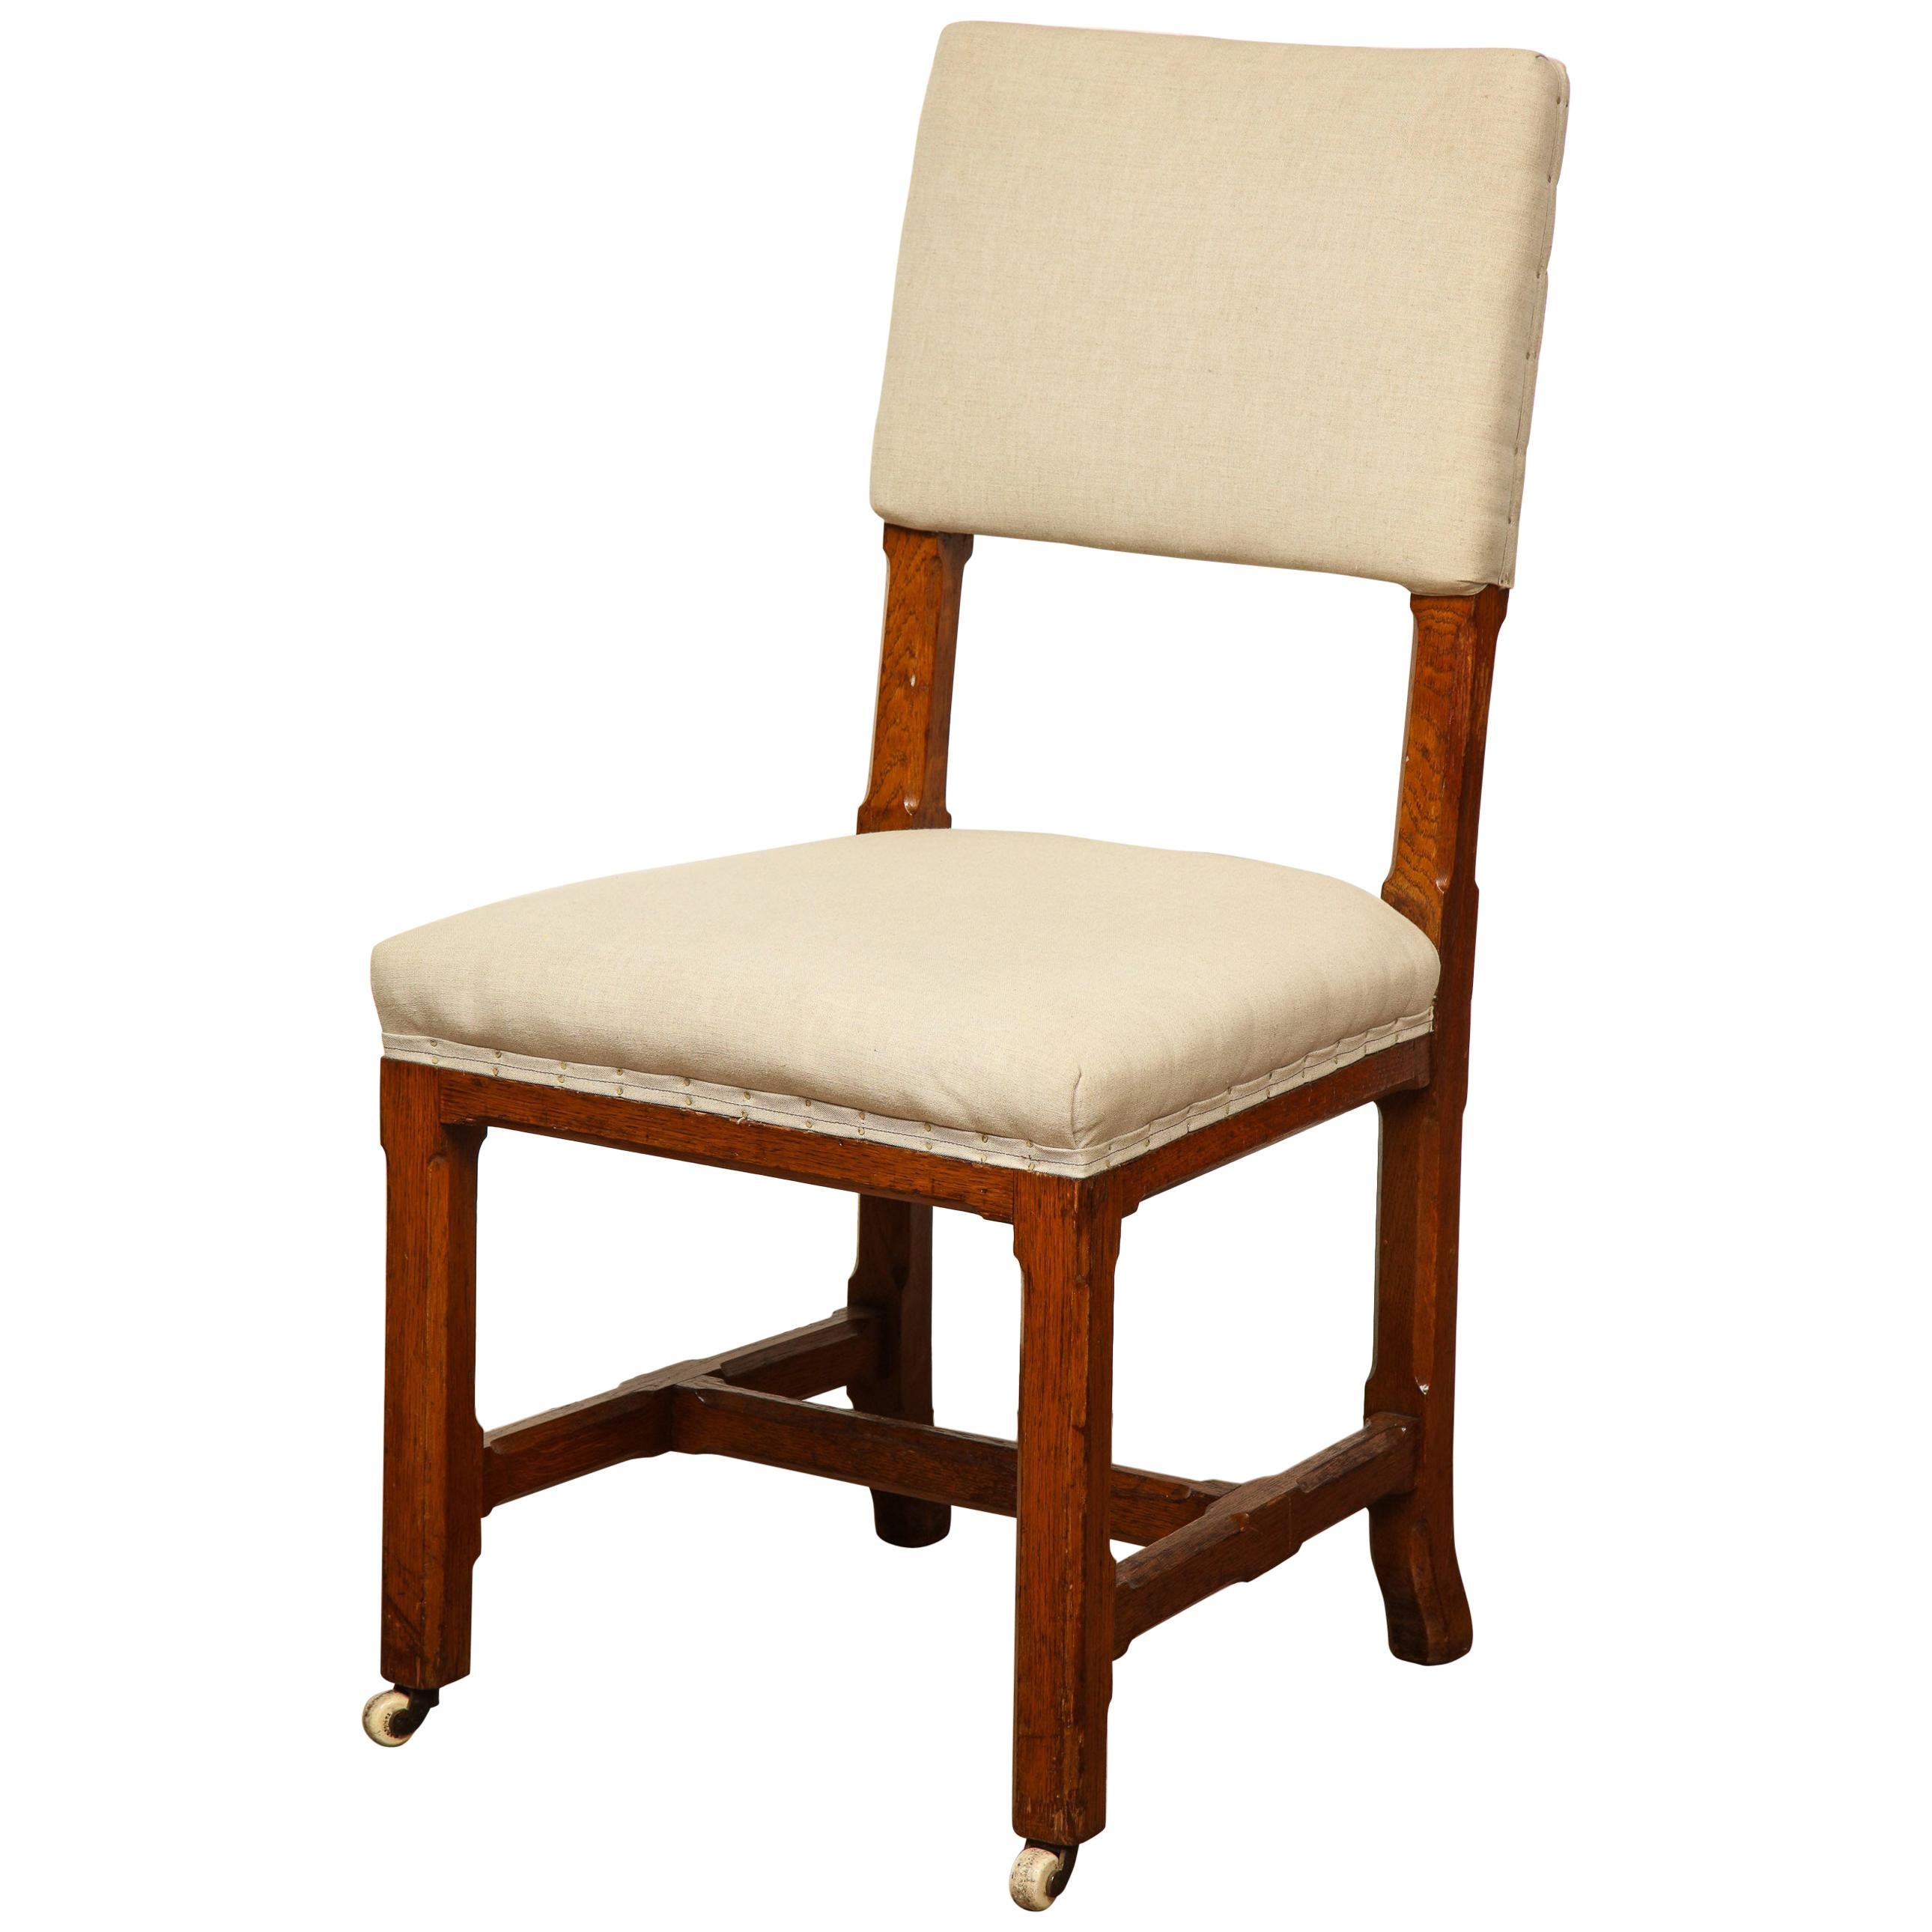 Mid-19th Century English Side Chair in the Manner of Pugin For Sale